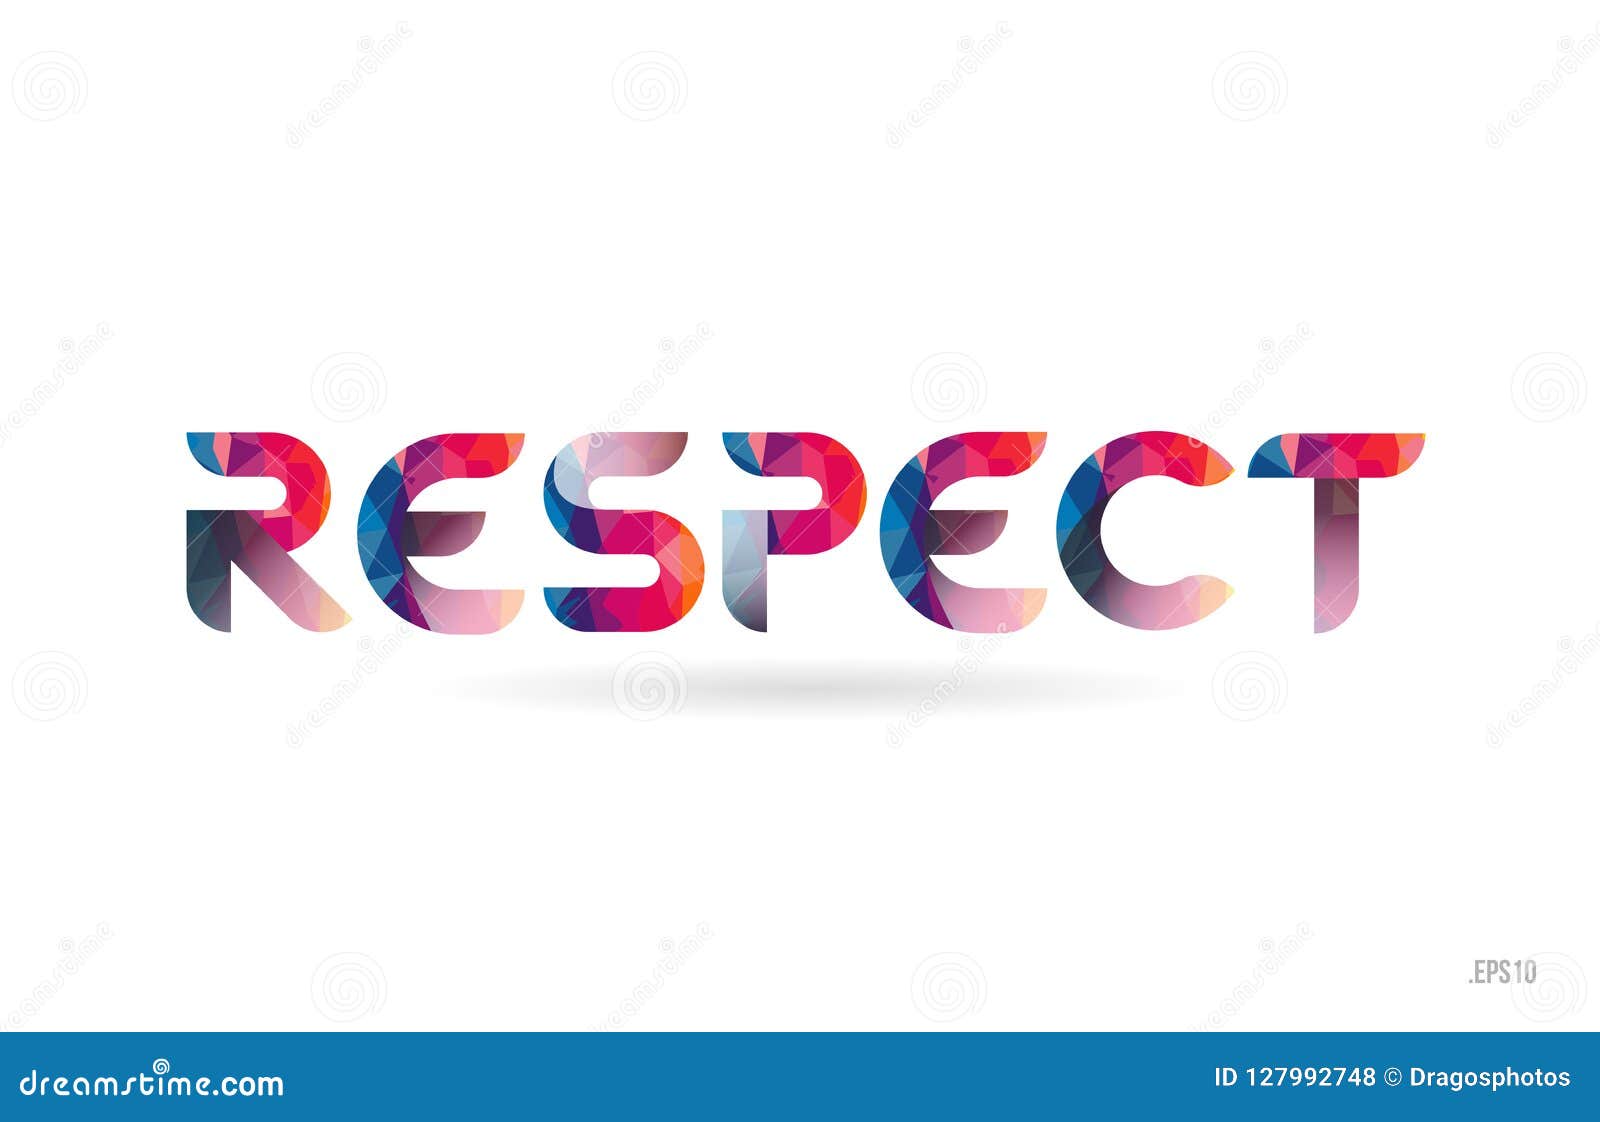 Respect Logo Vector Images (over 3,200)